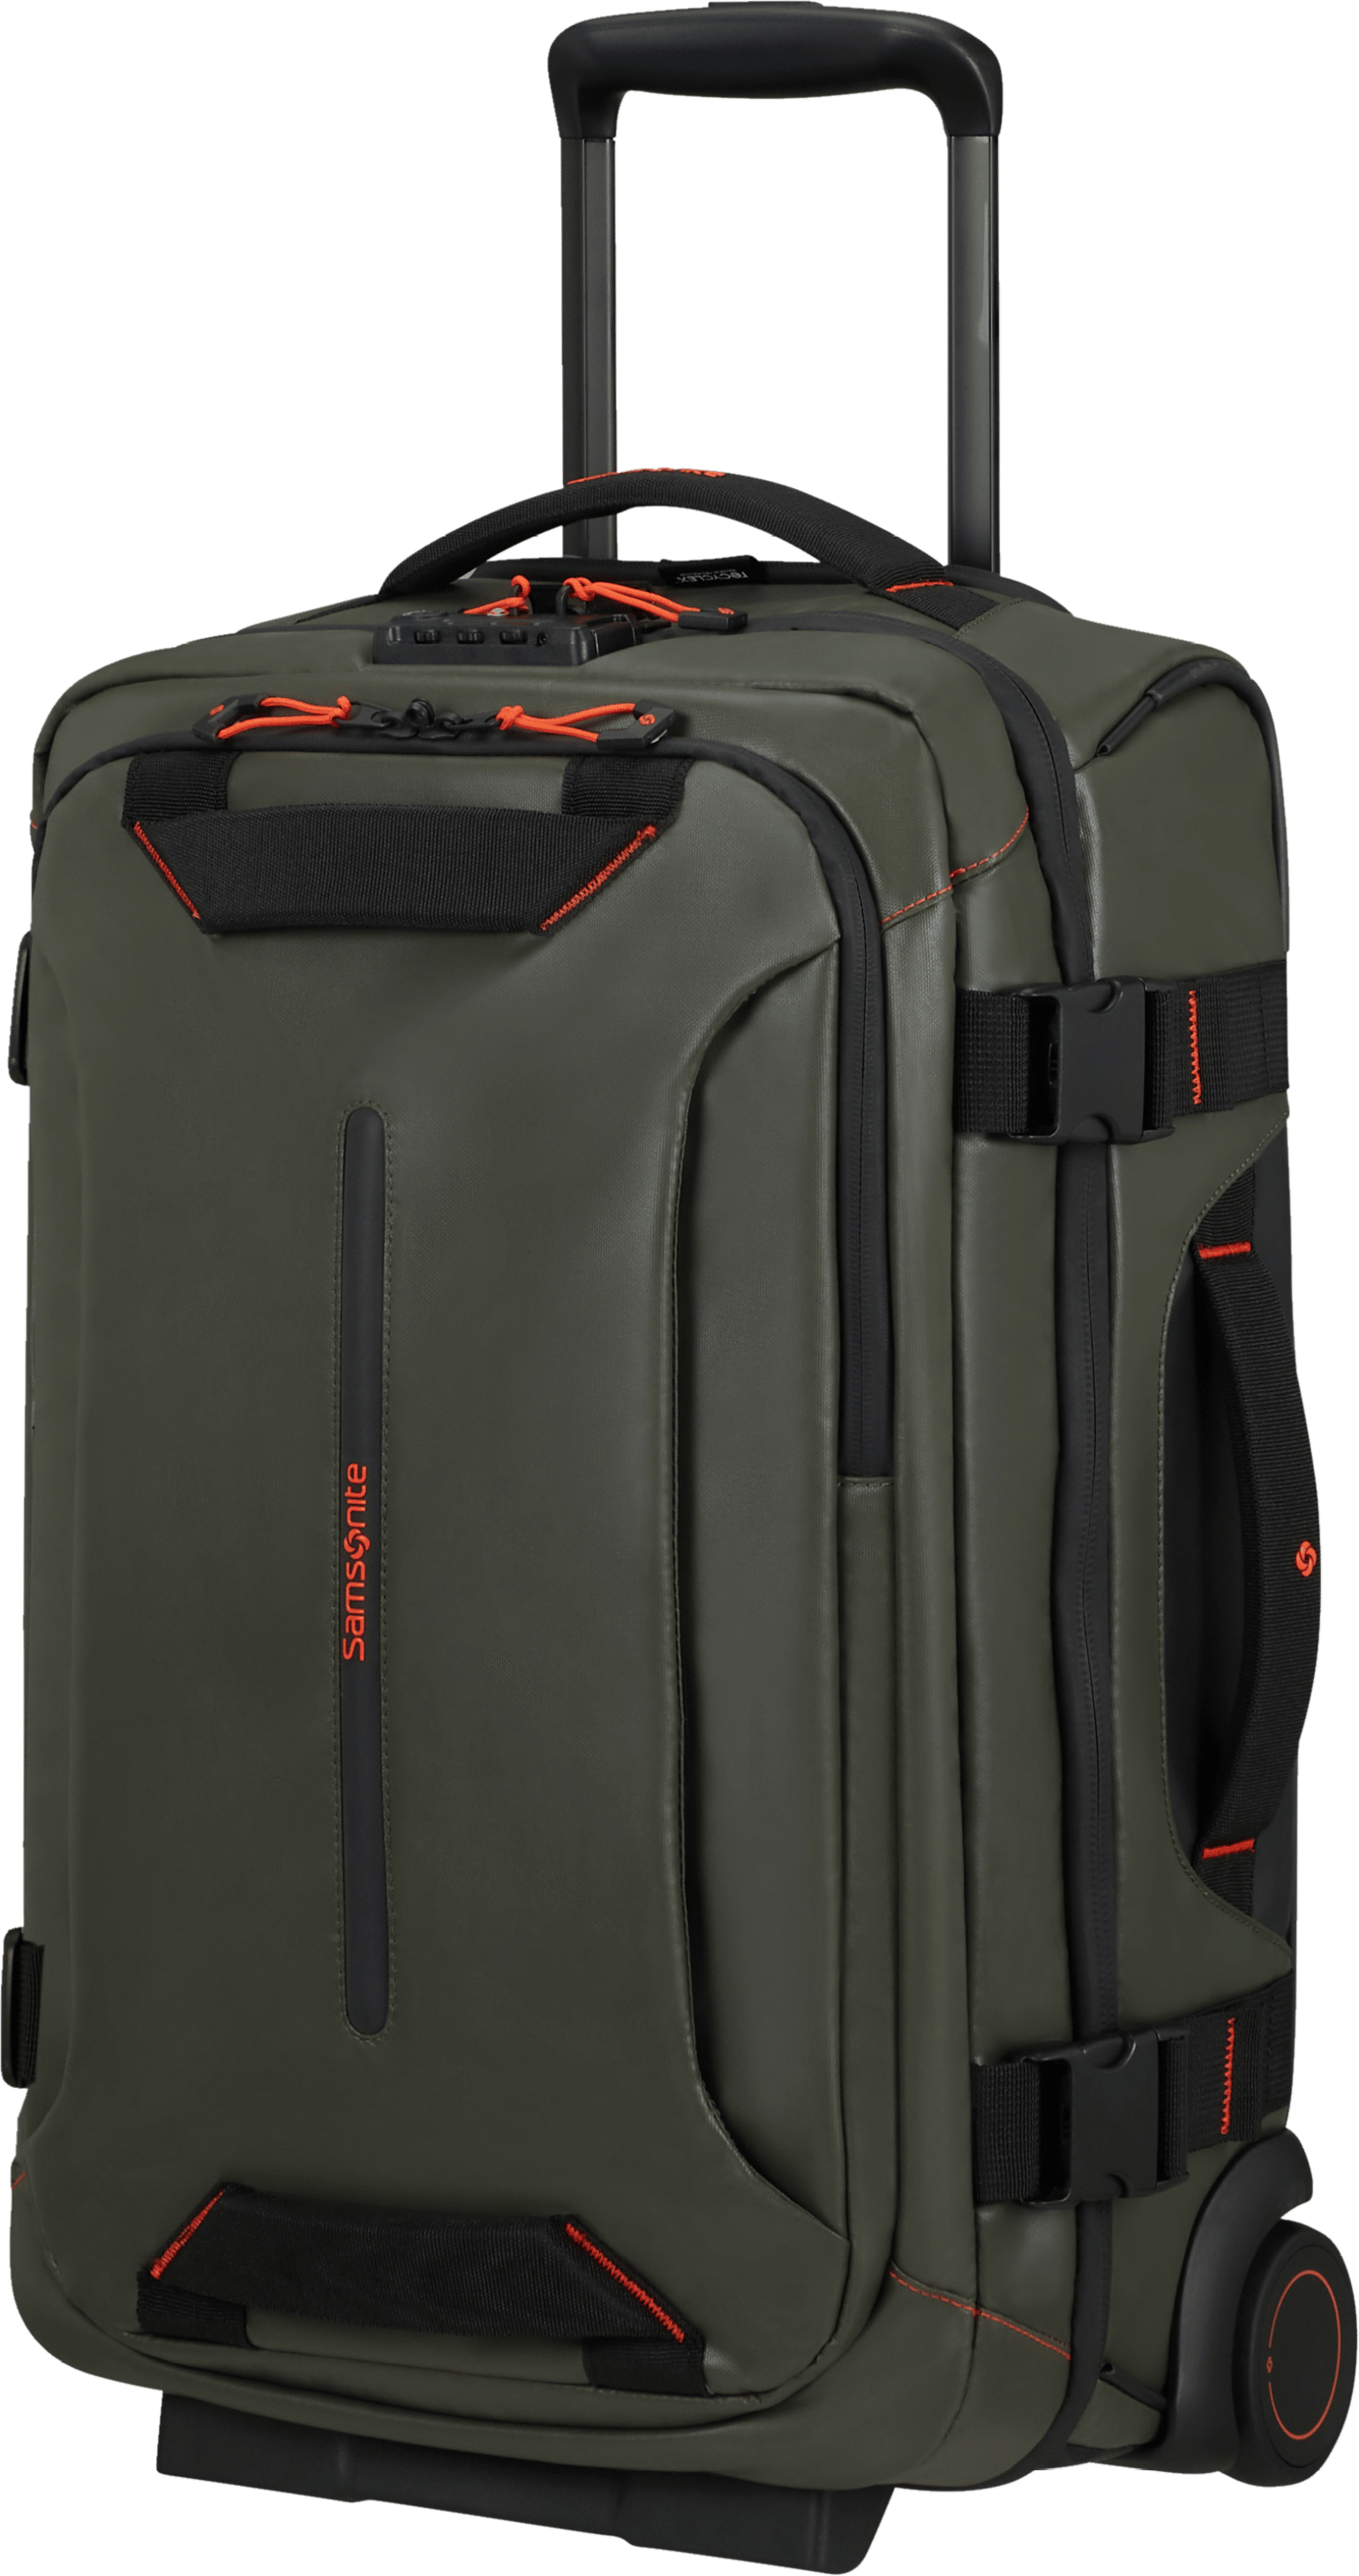 Samsonite Ecodiver Duffle with wheels double frame 55cm Climbing Ivy